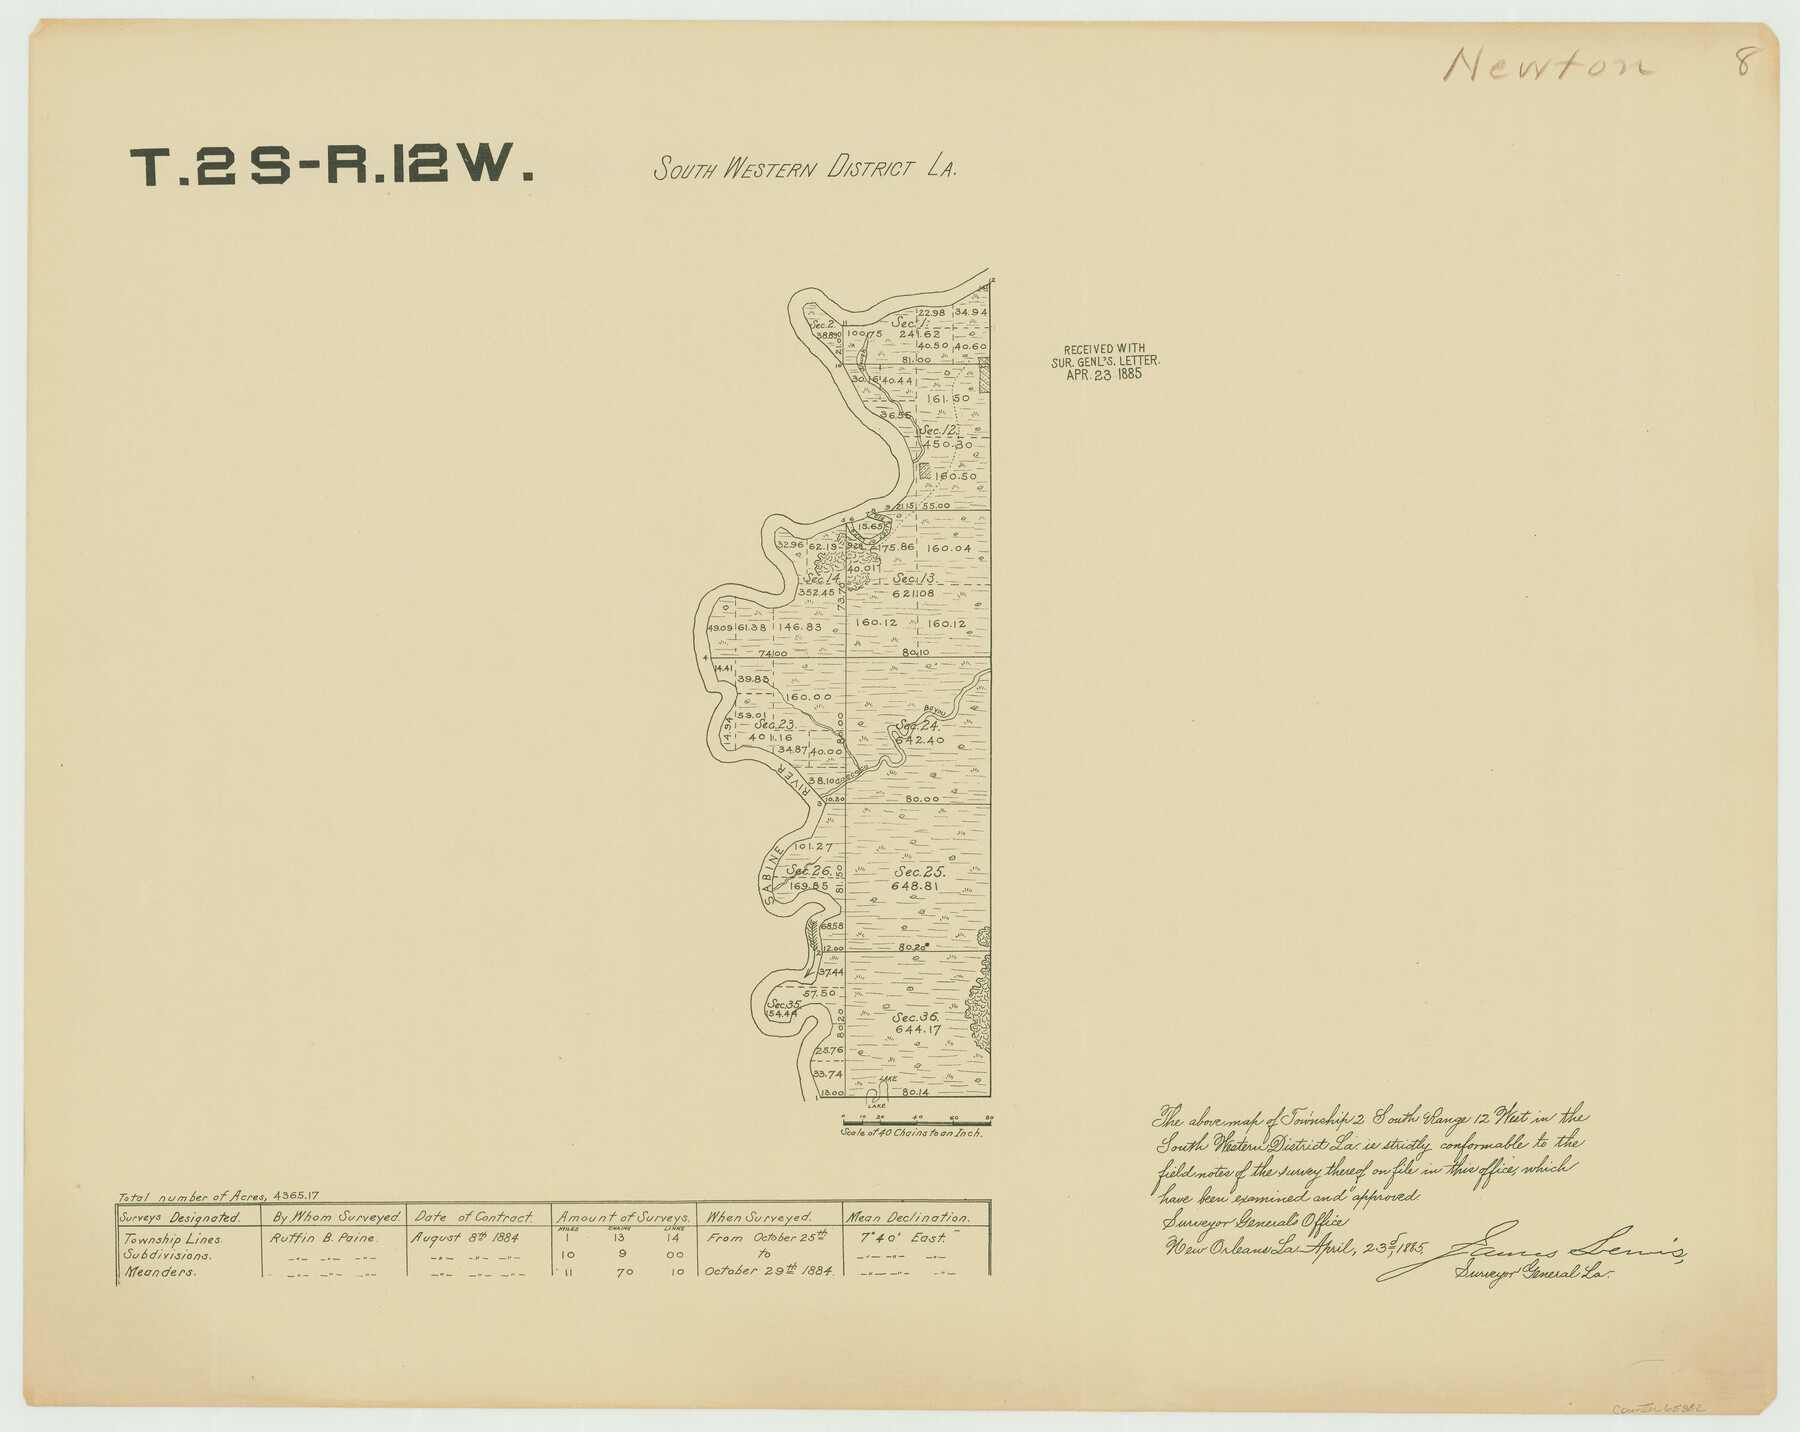 65882, Township 2 South Range 12 West, South Western District, Louisiana, General Map Collection